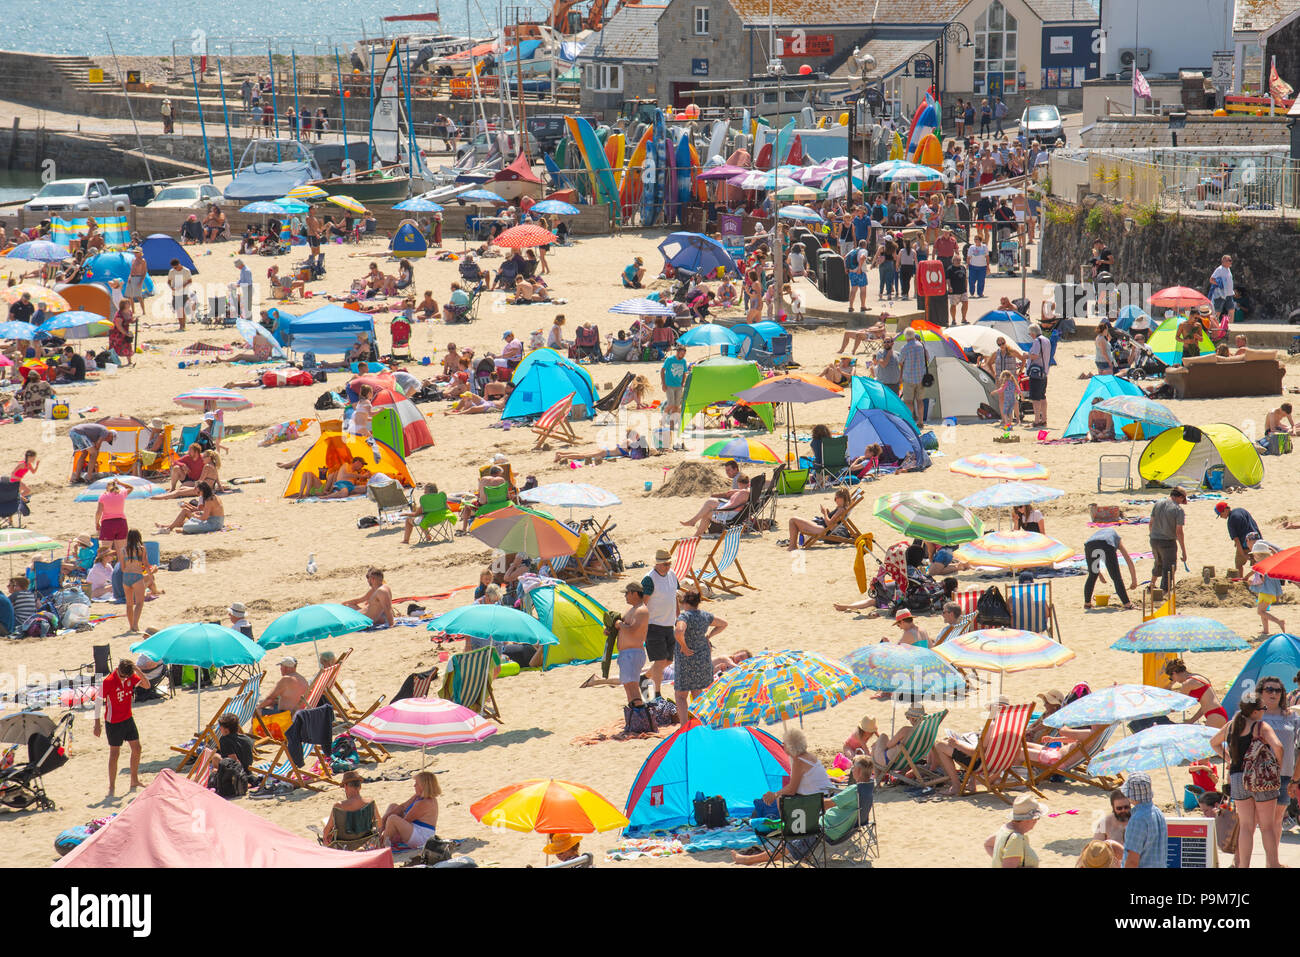 Lyme Regis, Dorset, UK. 19th July 2018.  UK Weather: Very warm and sunny in Lyme Regis.  Sunseekers flock to the beach to enjoy another day of hot sunshine and clear blue sky in the seaside resort of Lyme Regis. Credit: Celia McMahon/Alamy Live News Stock Photo